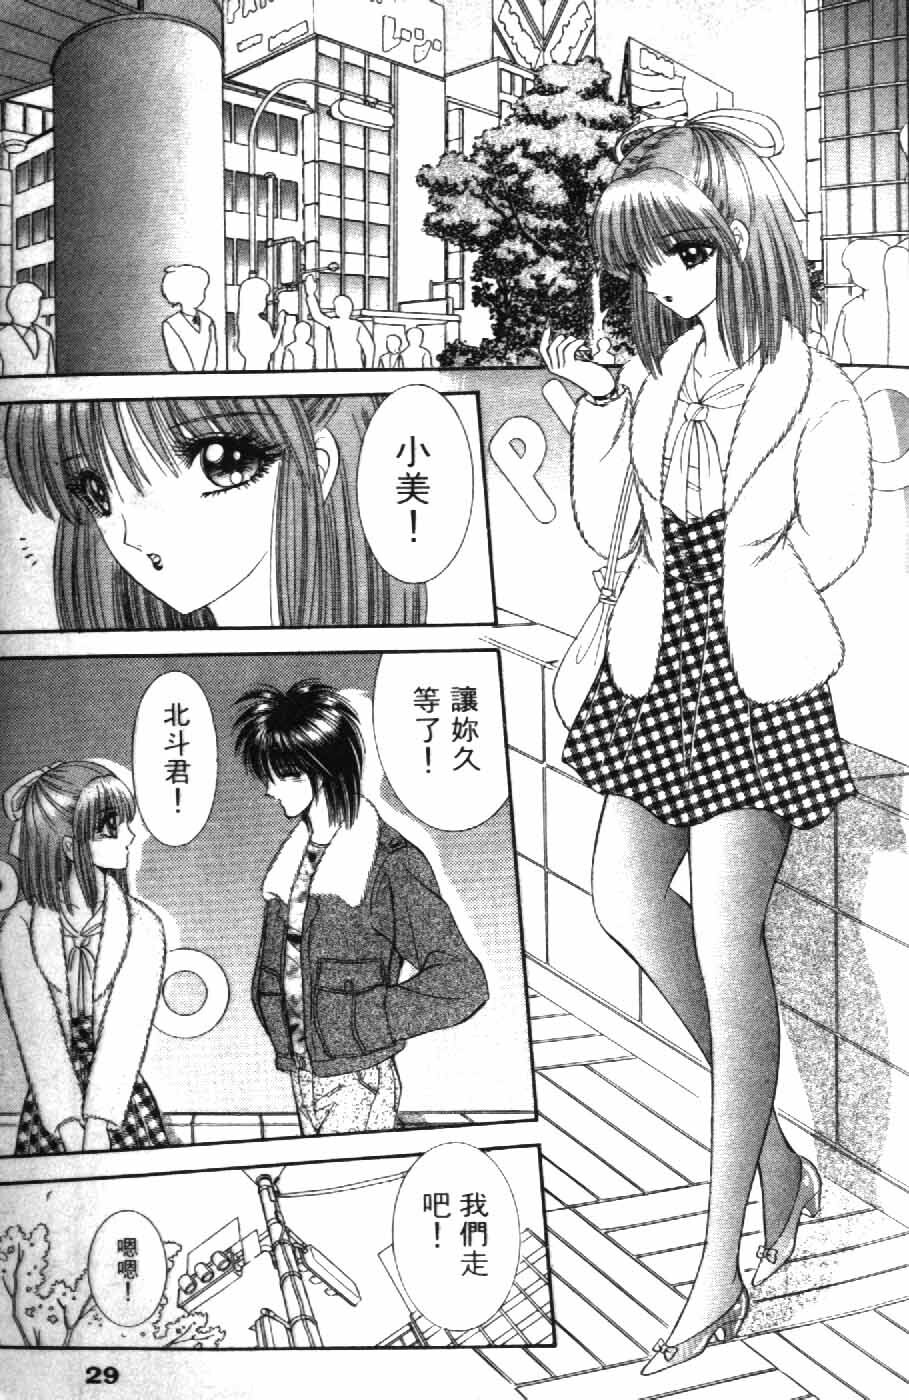 [Senno Knife] Ouma ga Horror Show 2 - Trans Sexual Special Show 2 | 顫慄博覽會 2 [Chinese] page 29 full